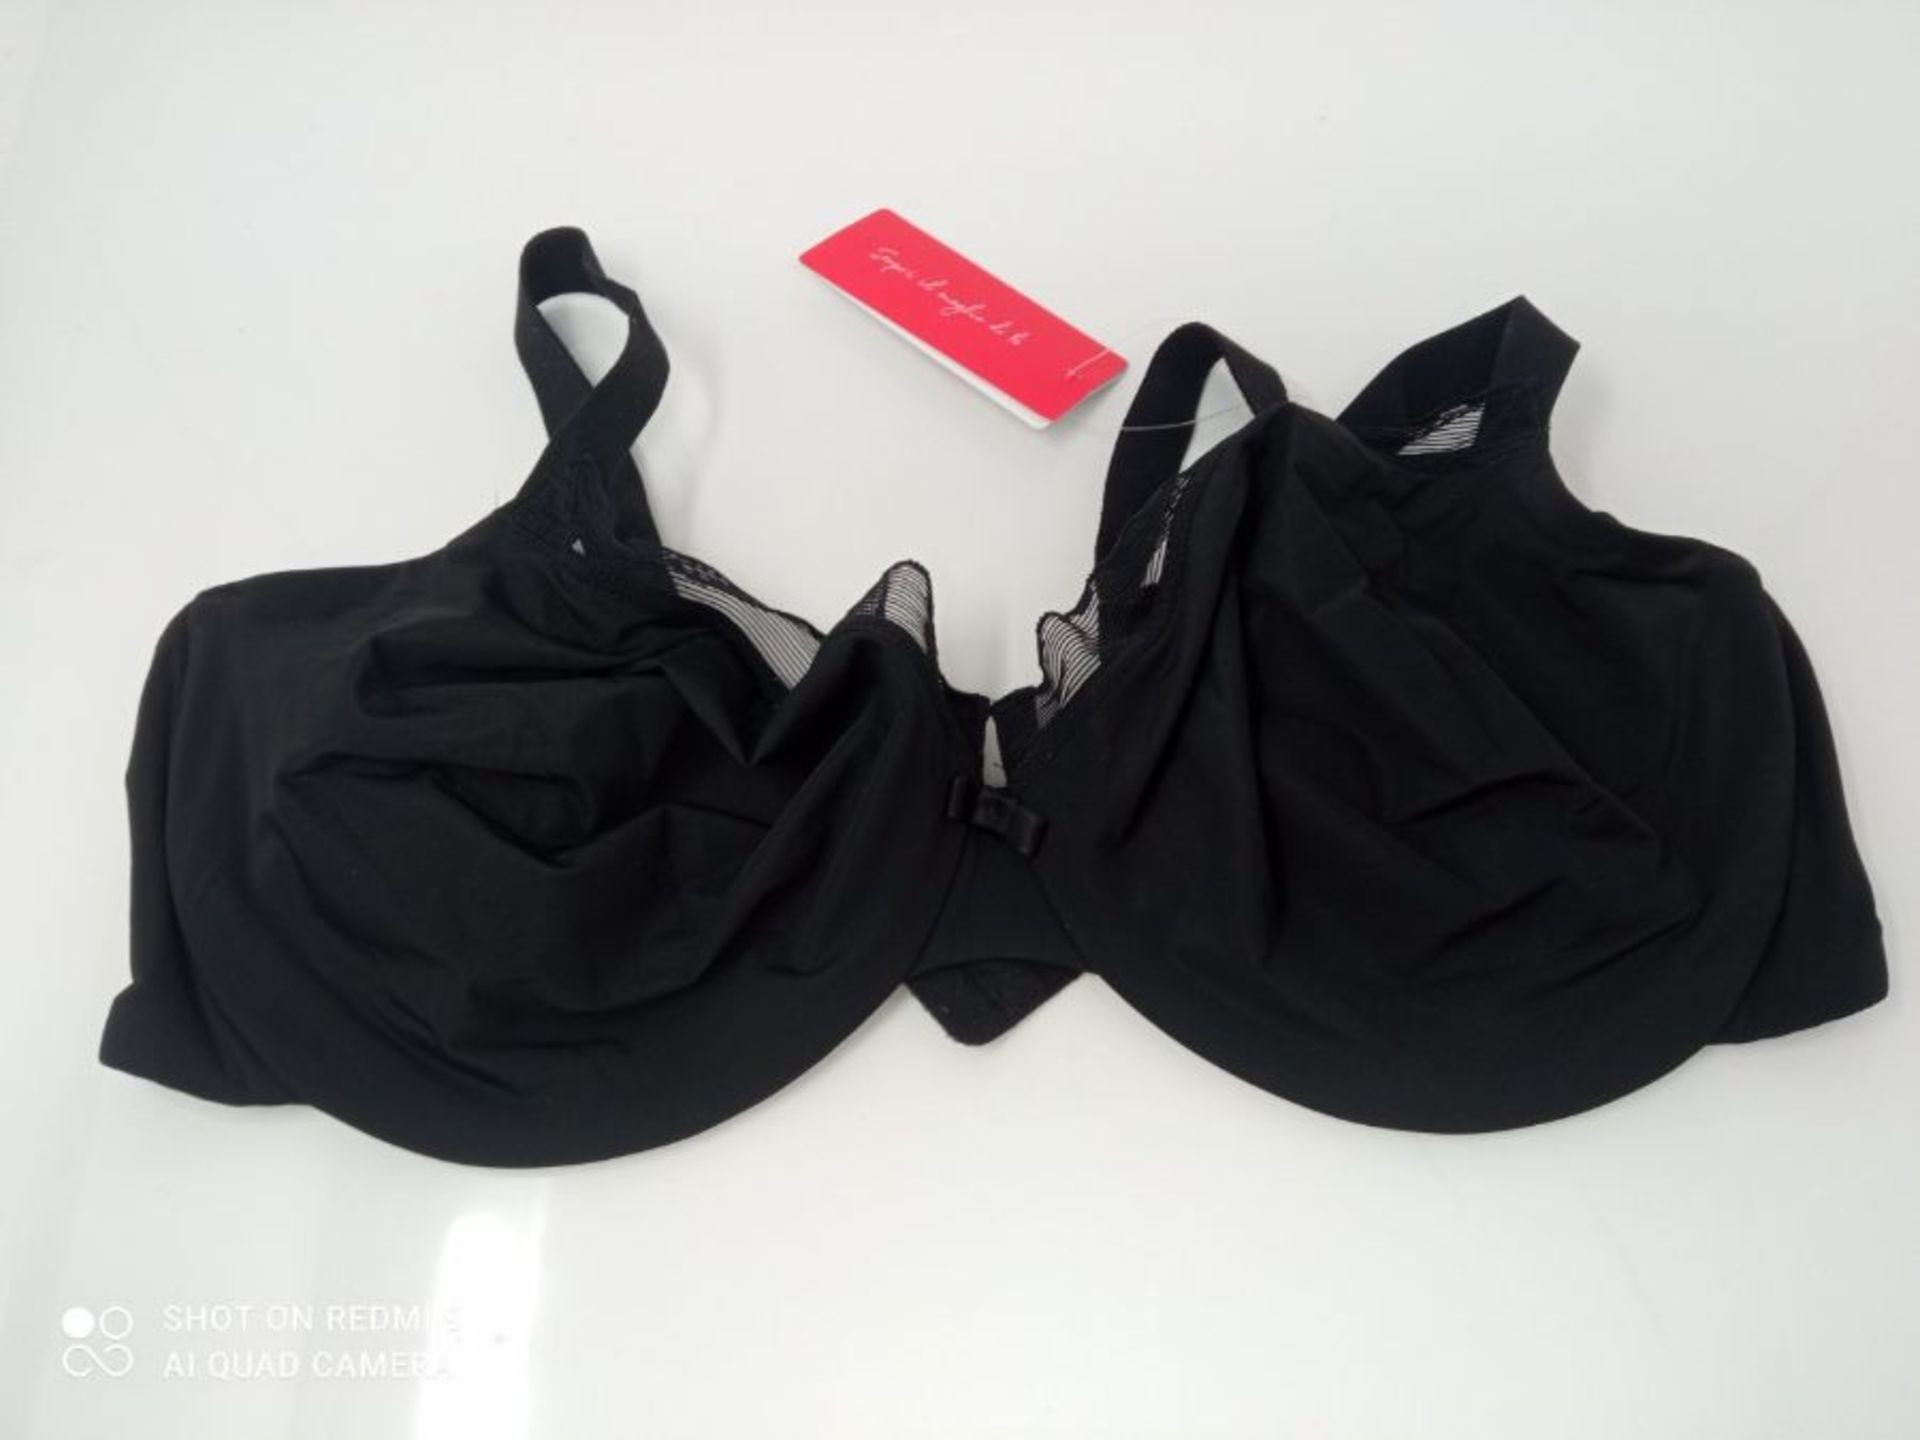 Lovable Donna My Daily Comfort Bra, Black (004-NERO), 5-D / 38 D - Image 3 of 3